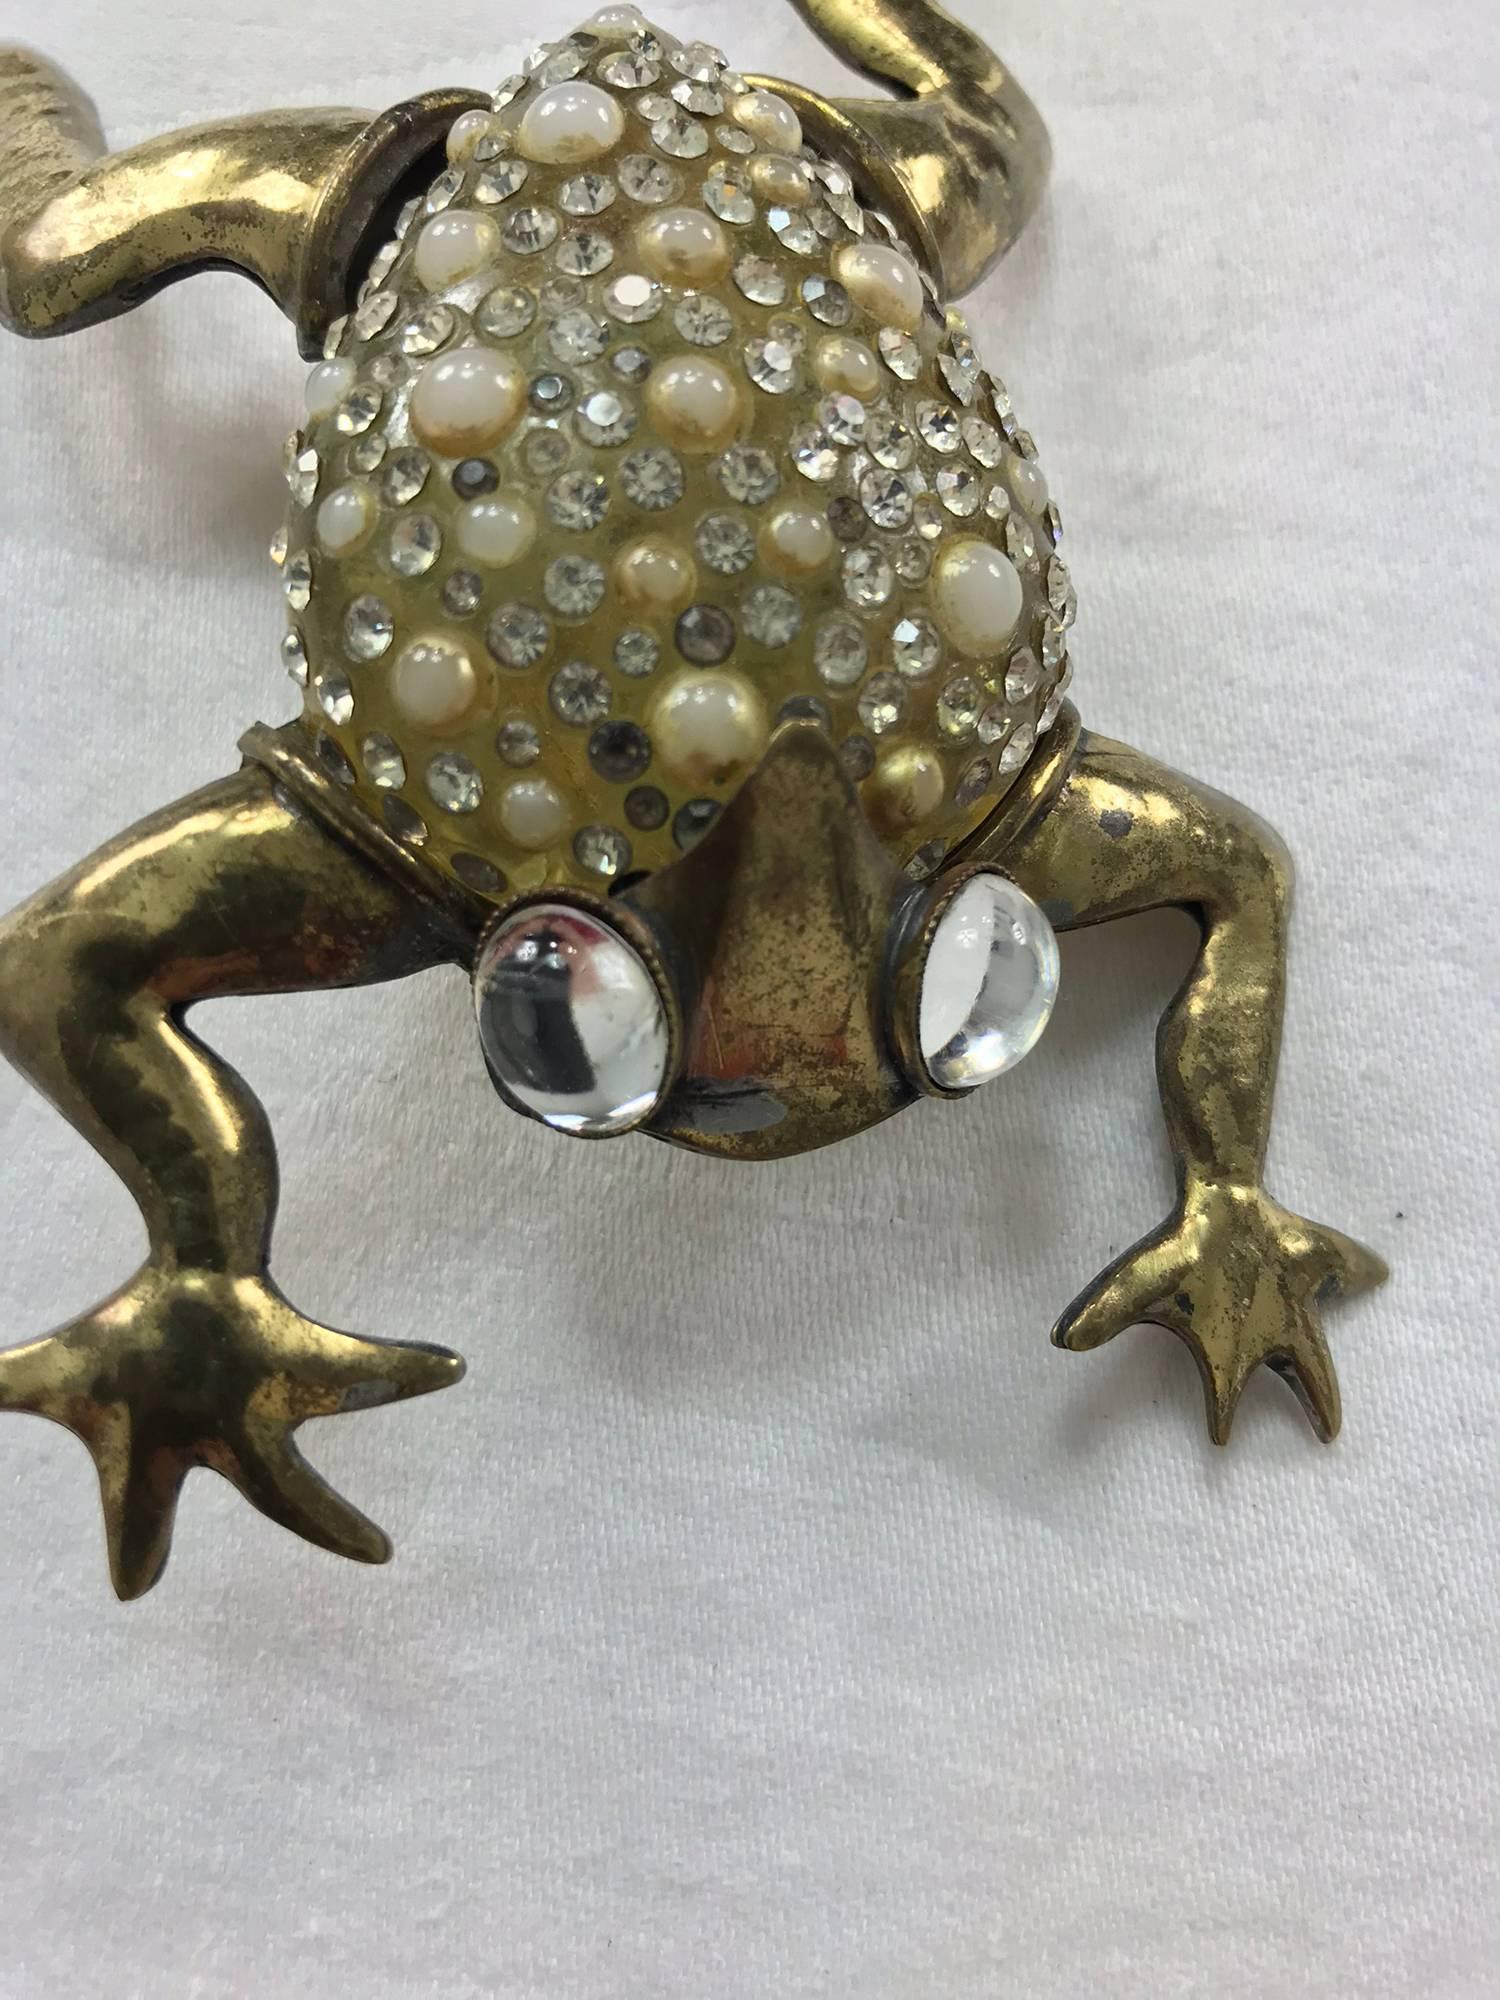 Fabrice Paris, huge frog pin the resin body is set with rhinestones and pearls, crystal eyes and  golden brass legs and arms, this pin is a large almost 5